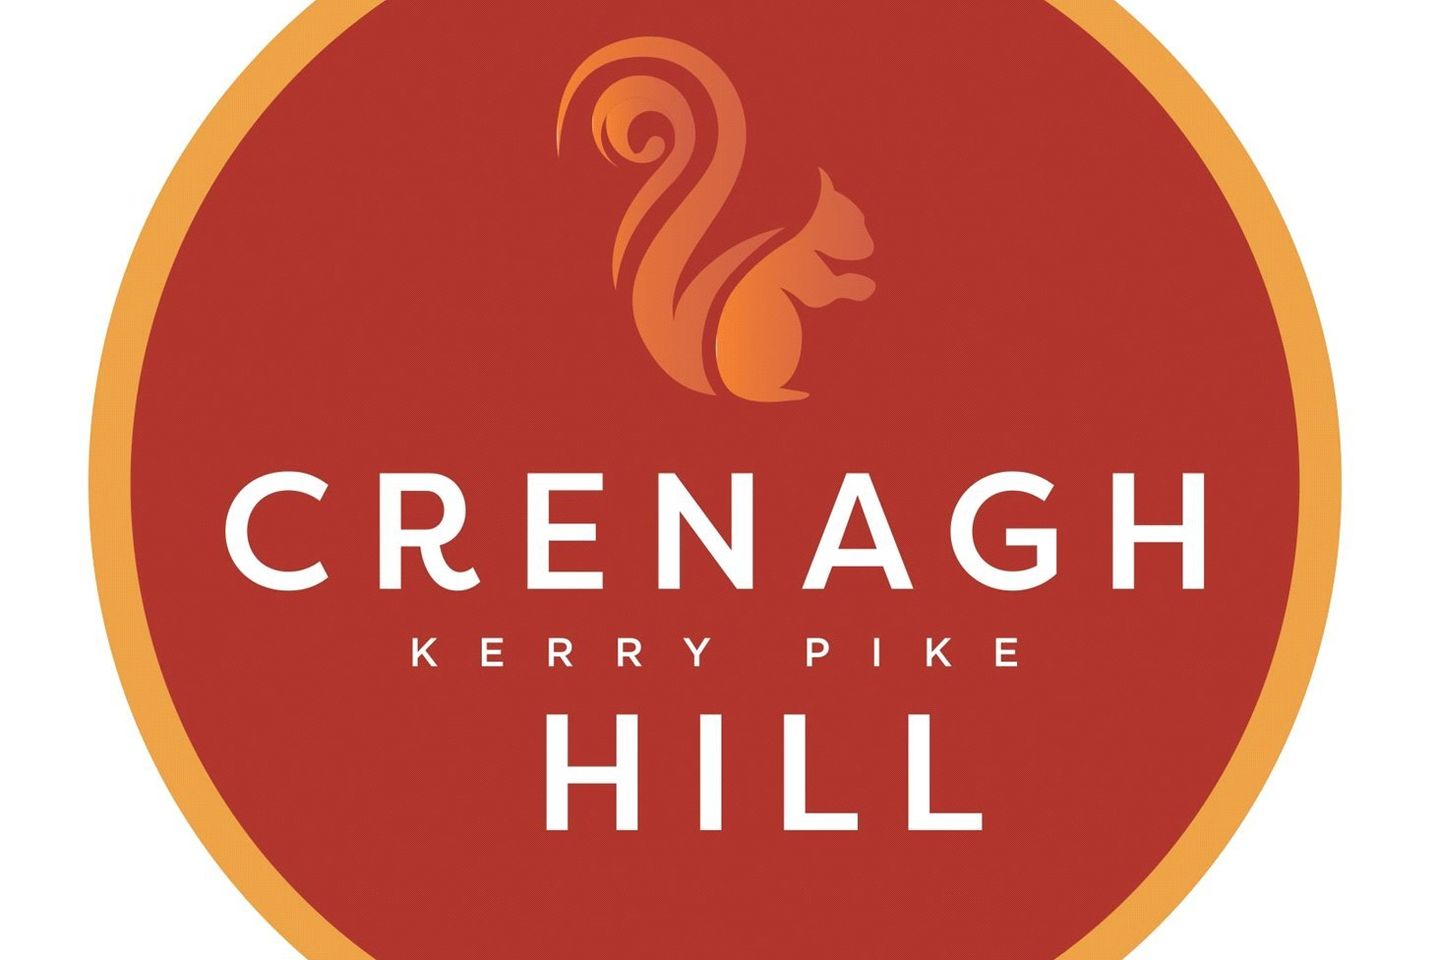 2 Bed Mid Terrace, Crenagh Hill, 2 Bed Mid Terrace, Crenagh Hill, Kerry Pike, Co. Cork